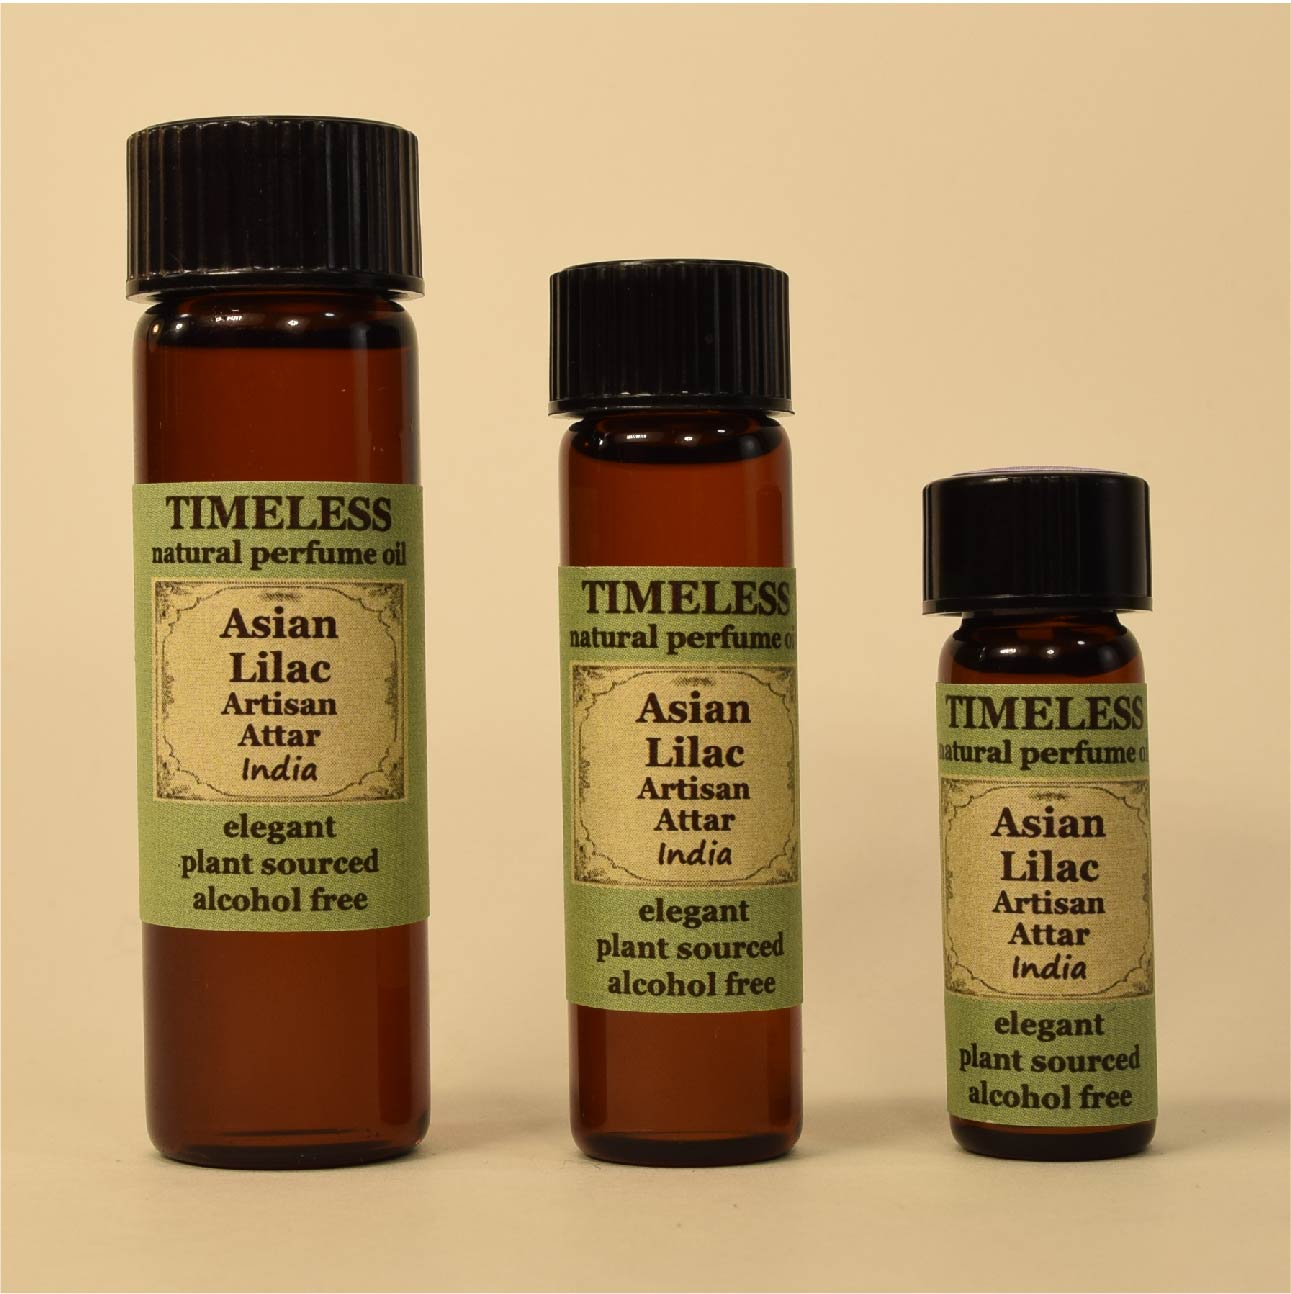 TIMELESS  Asian Lilac Attar has a light, refreshing floral scent.